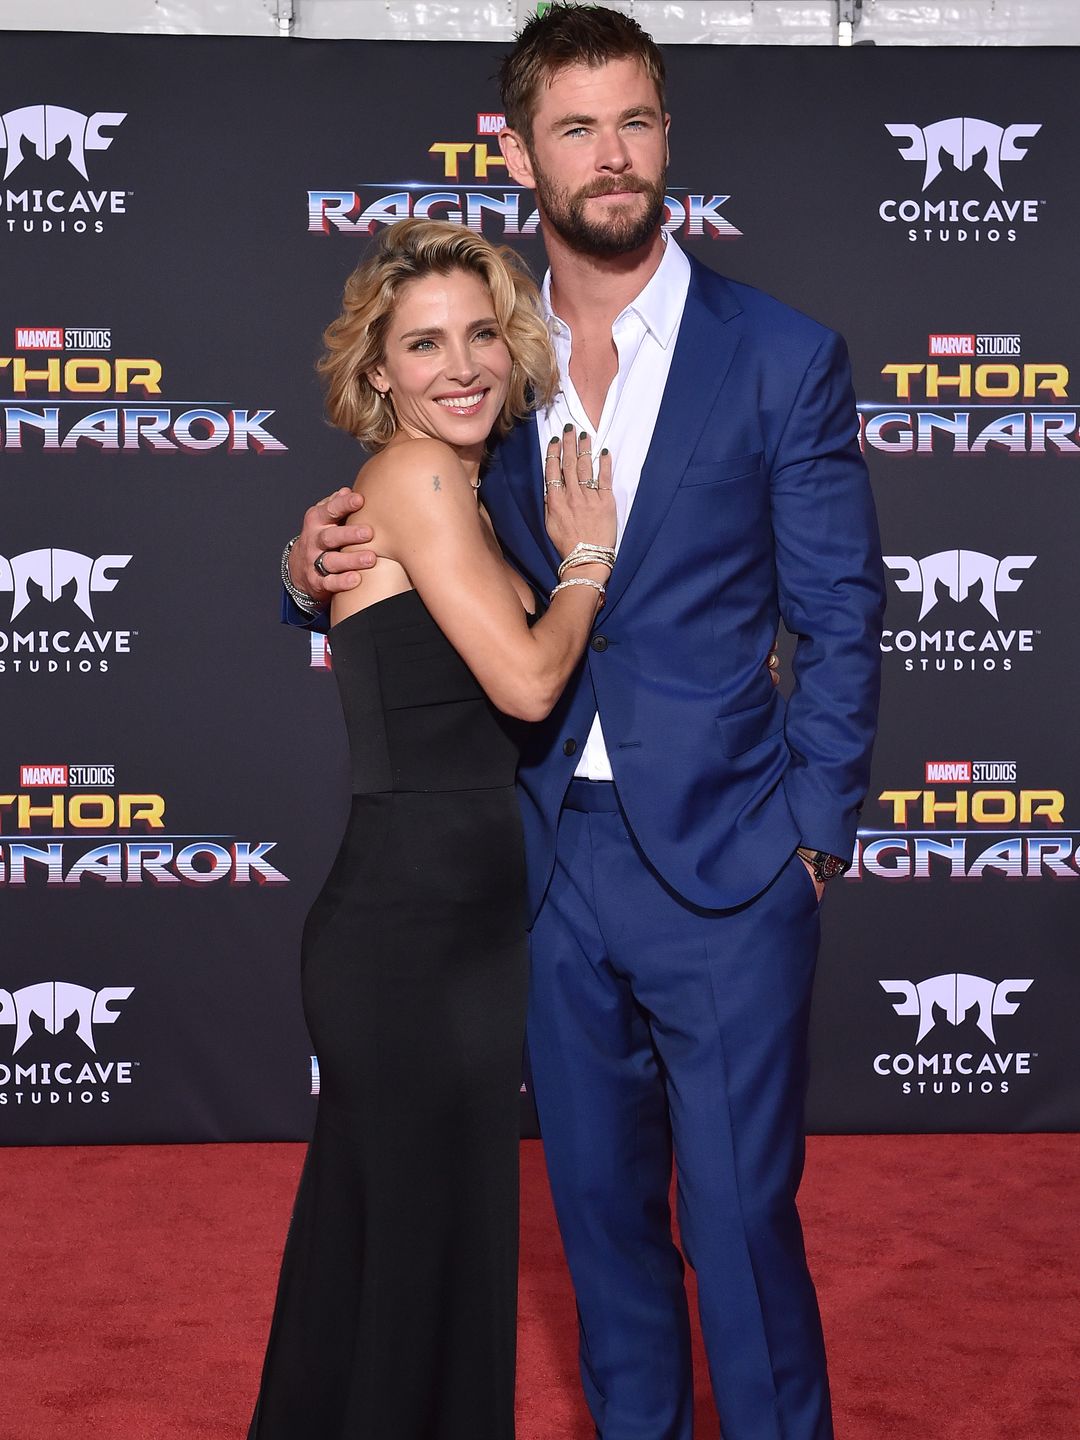 Chris Hemsworth and Elsa Pataky posing together on a red carpet, smiling at the camera